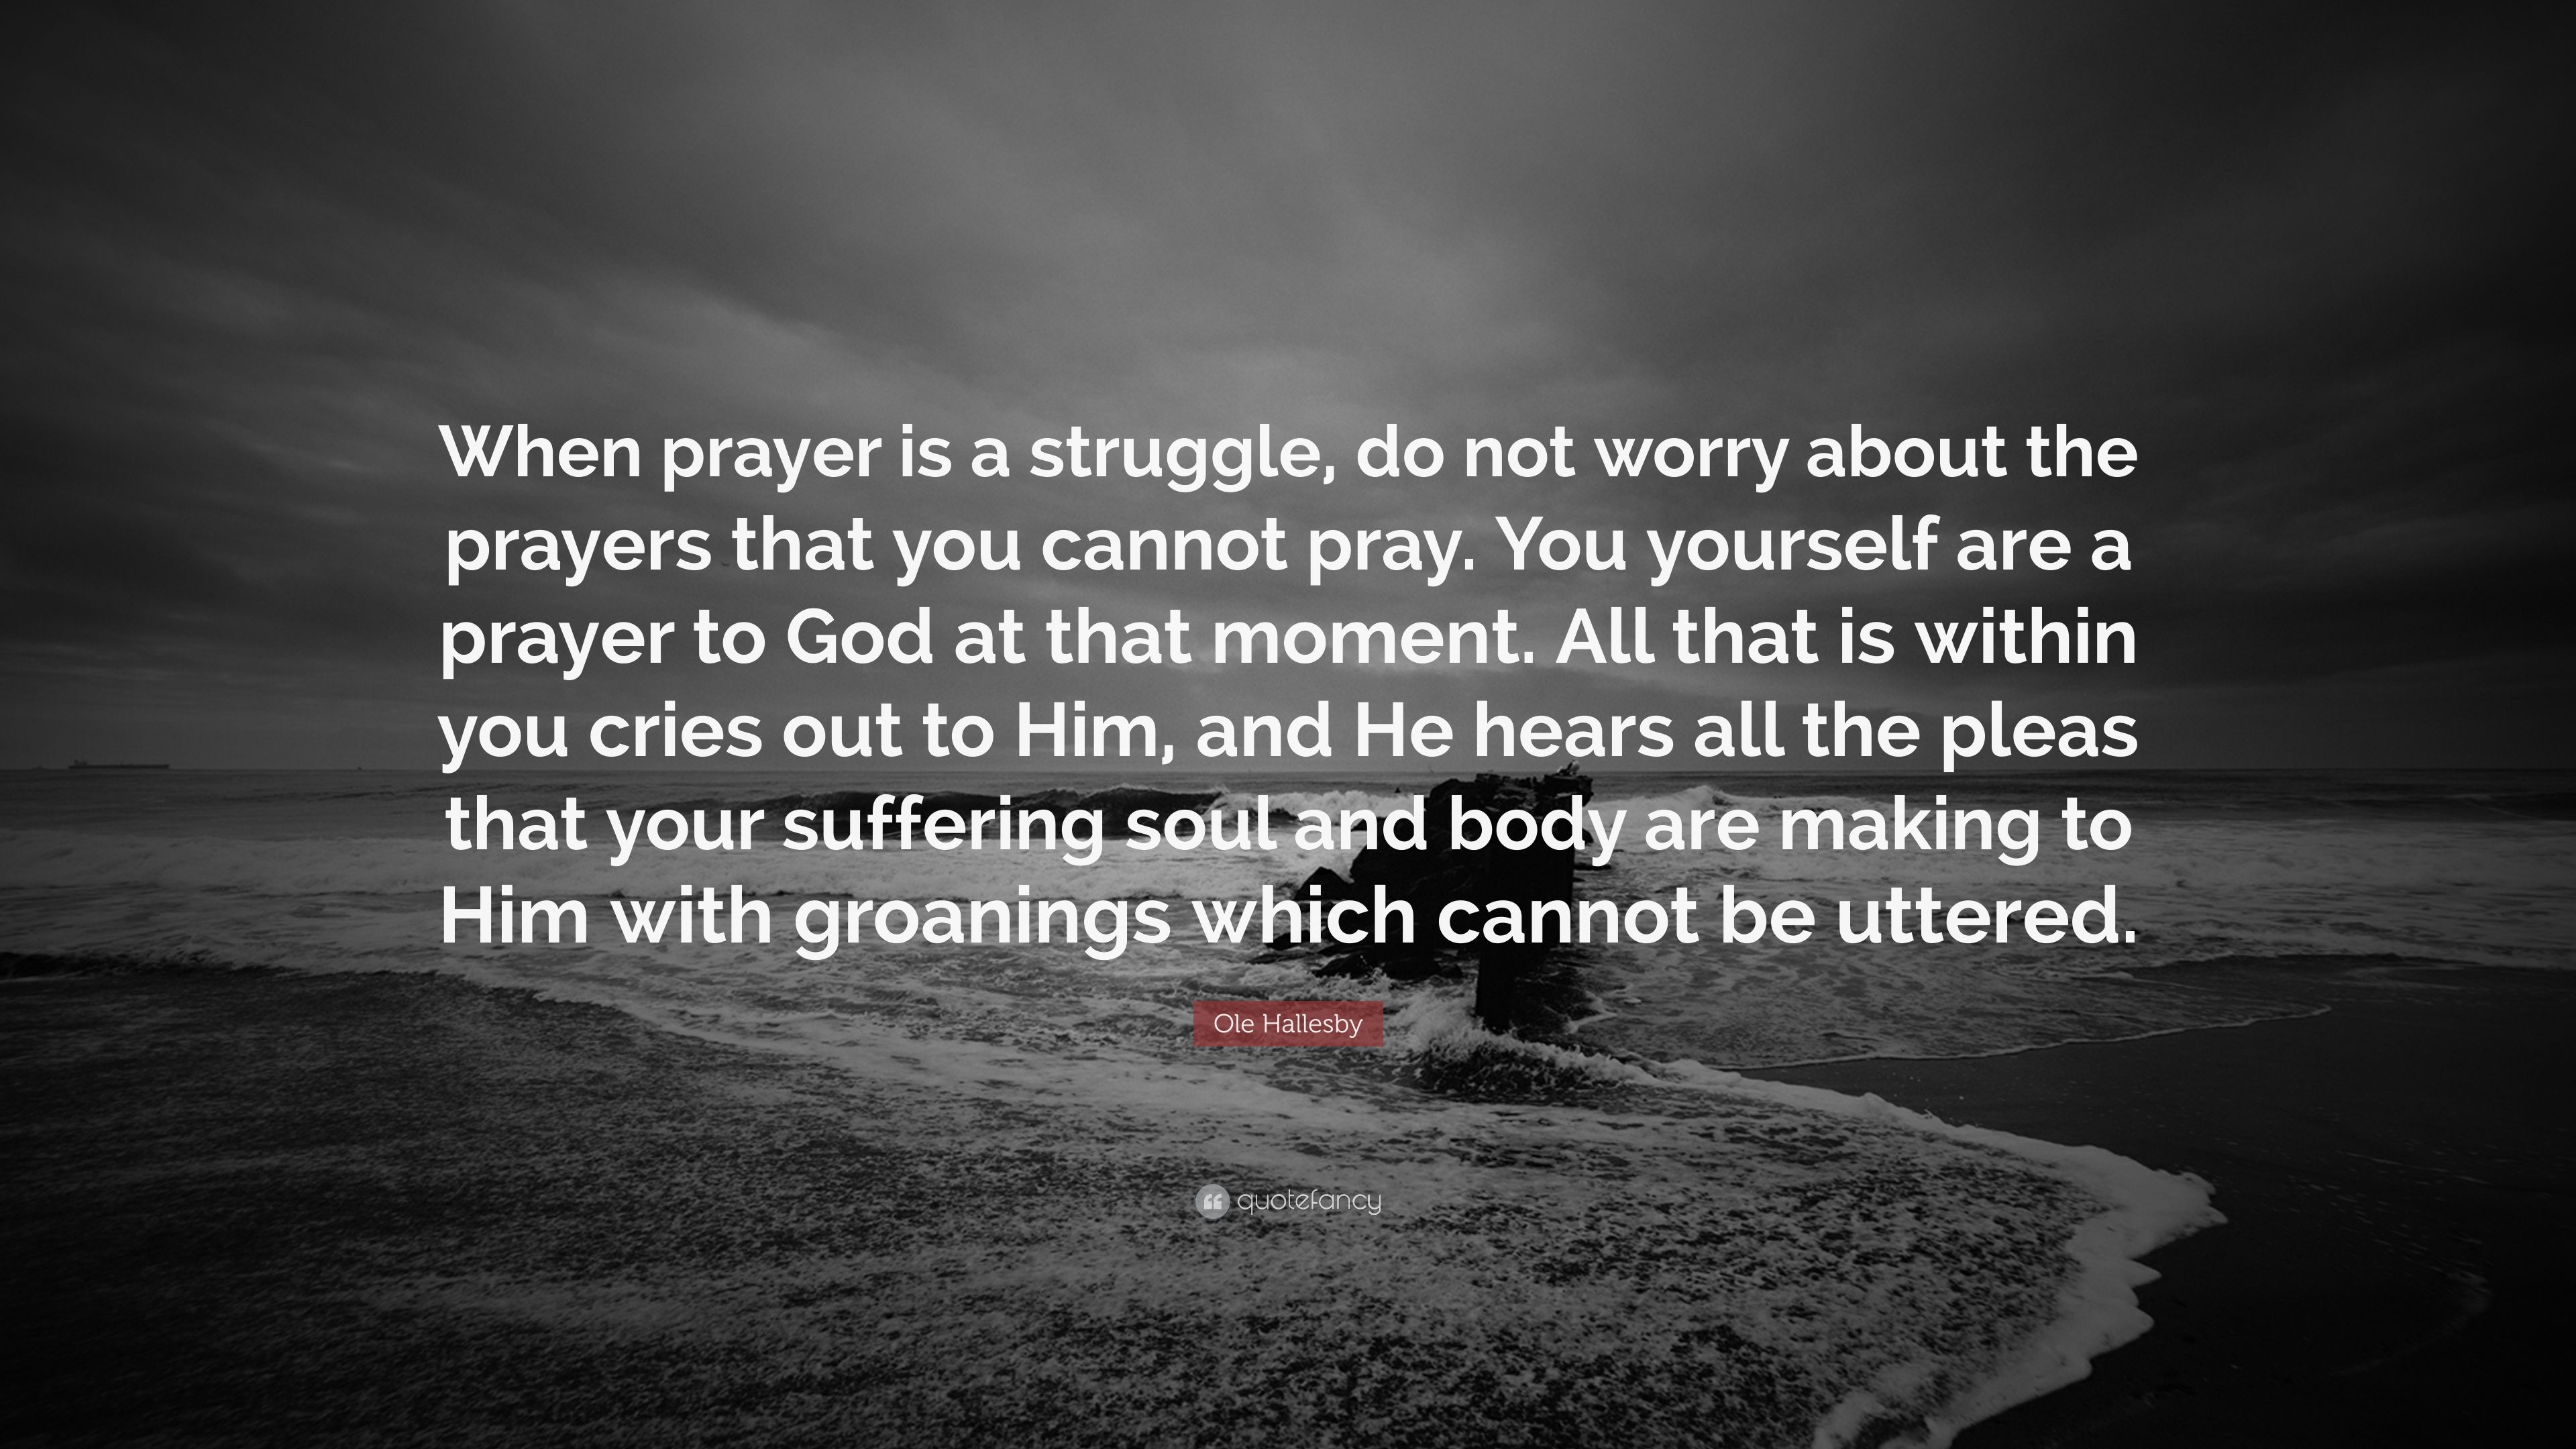 Ole Hallesby Quote: “When prayer is a struggle, do not worry about